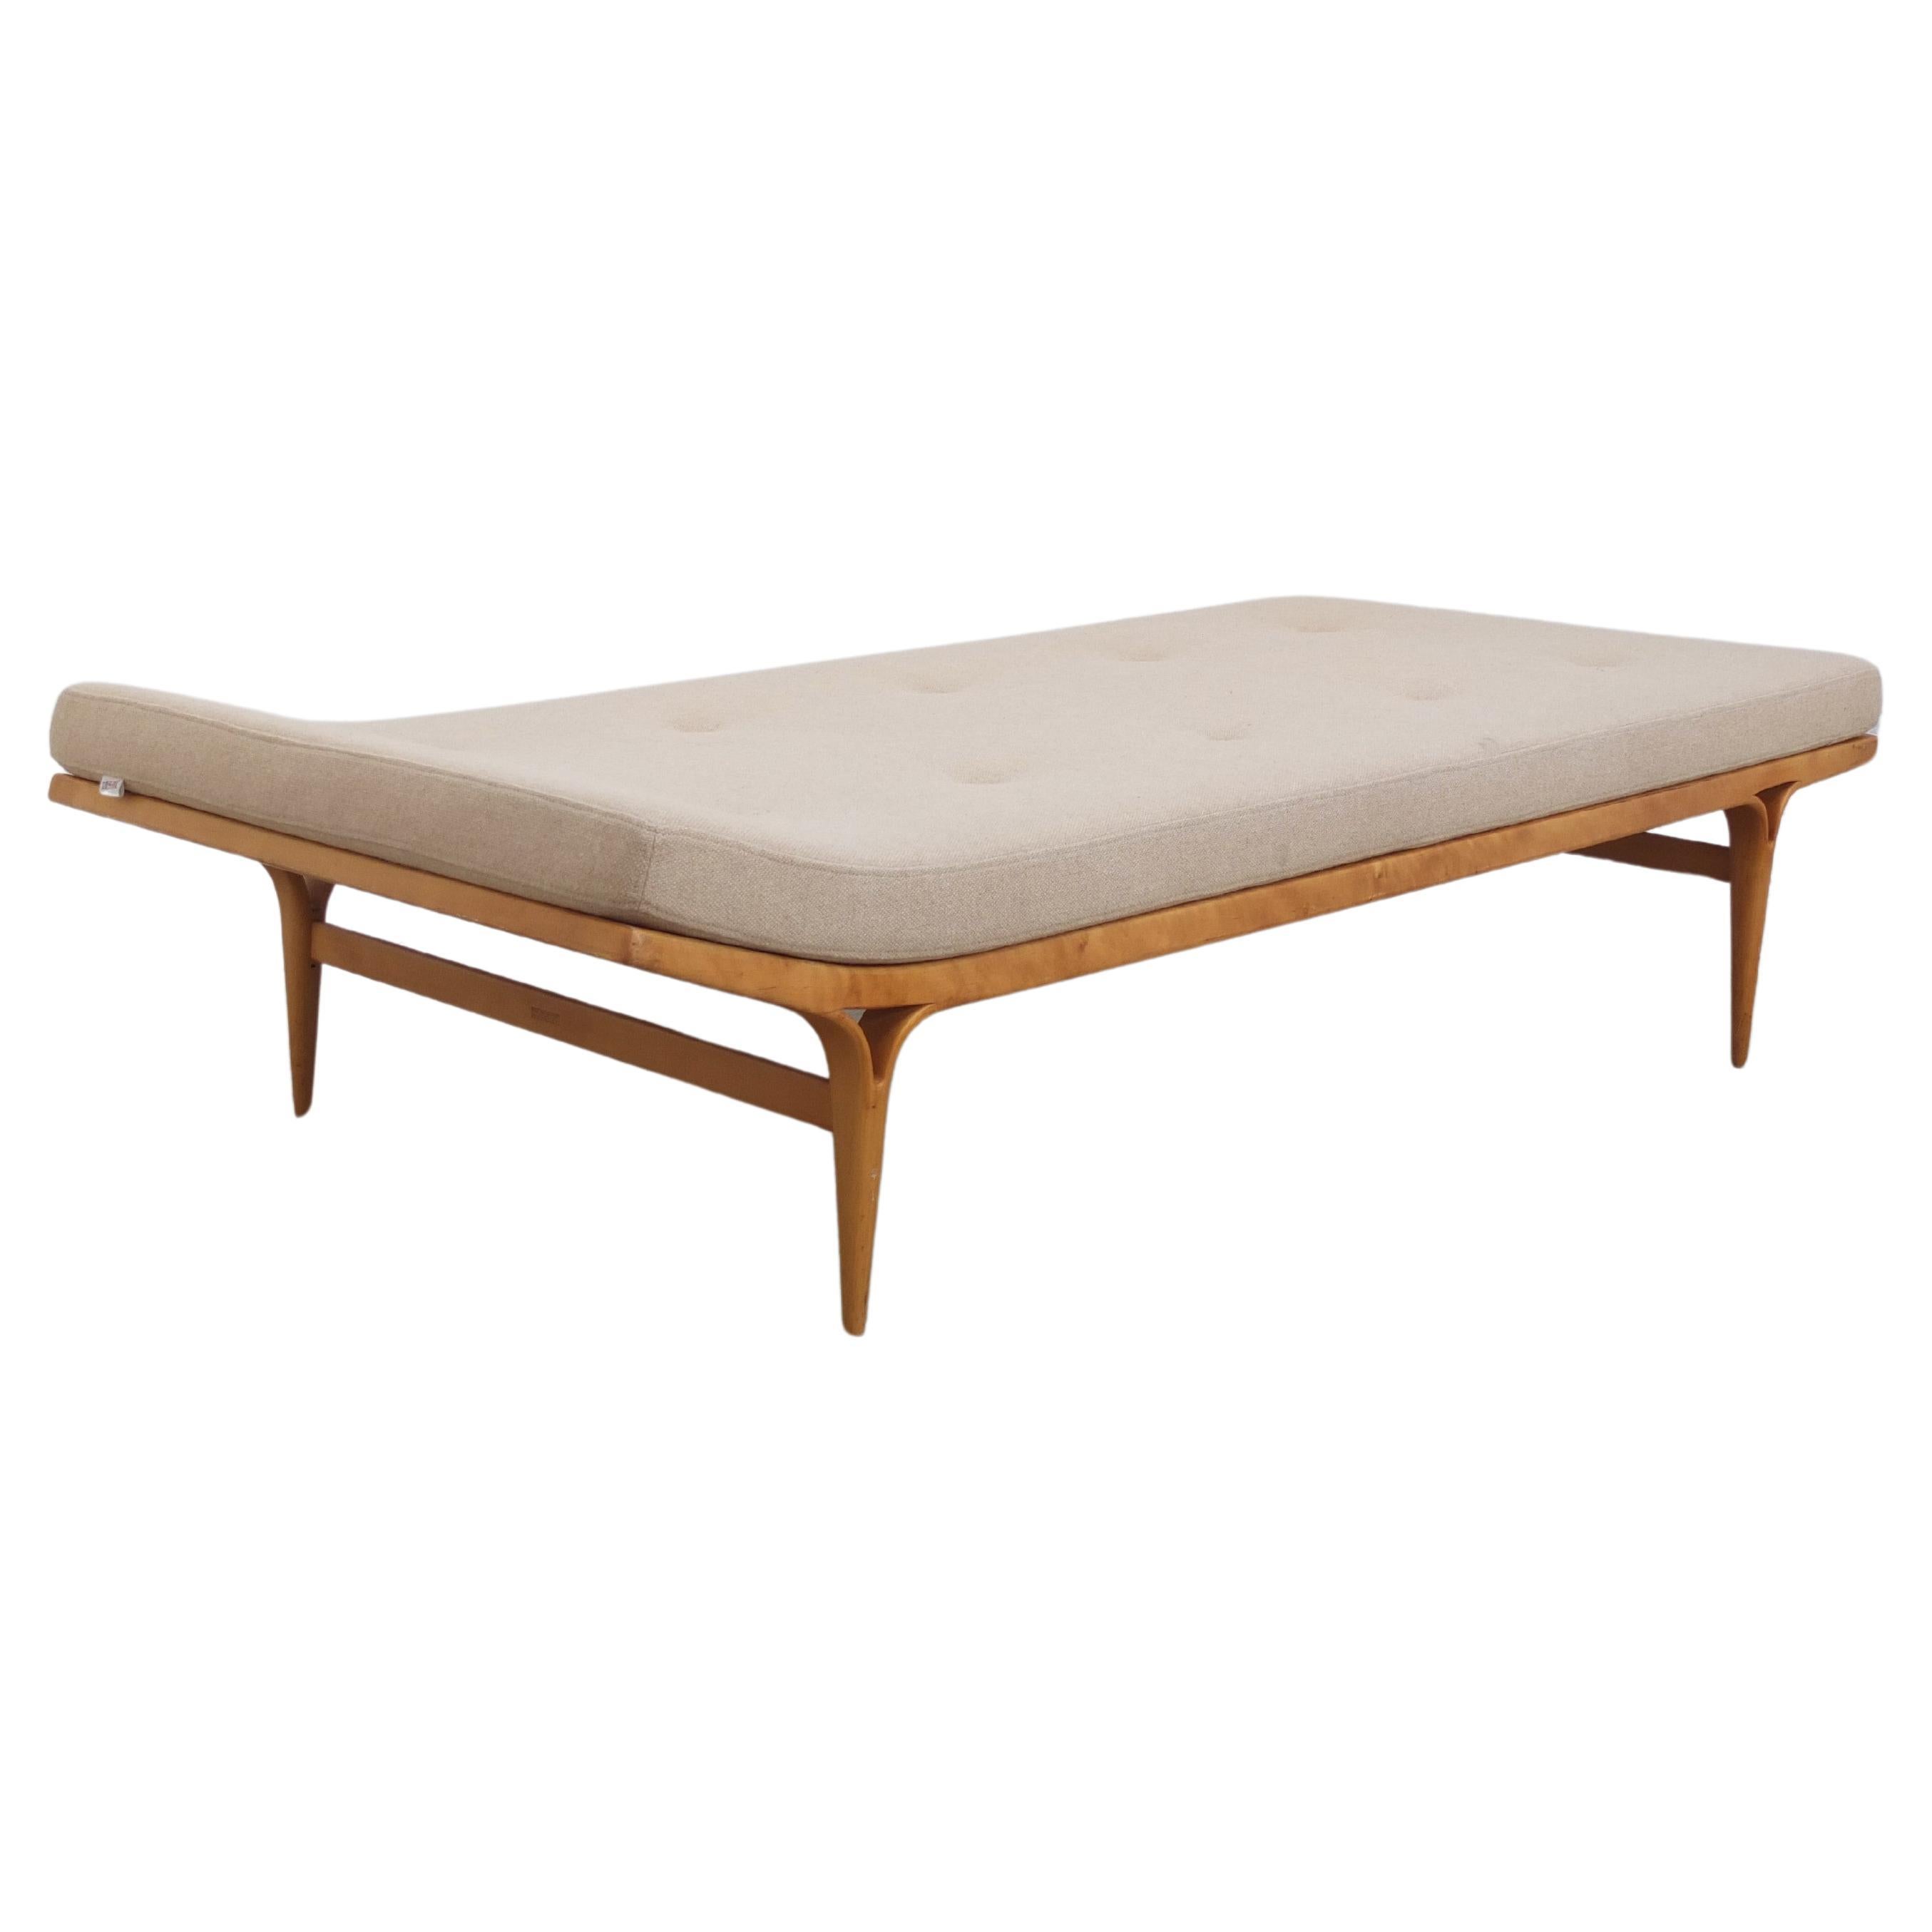 Rare 'Berlin' Daybed by Bruno Mathsson for Karl Mathsson, 1957 For Sale